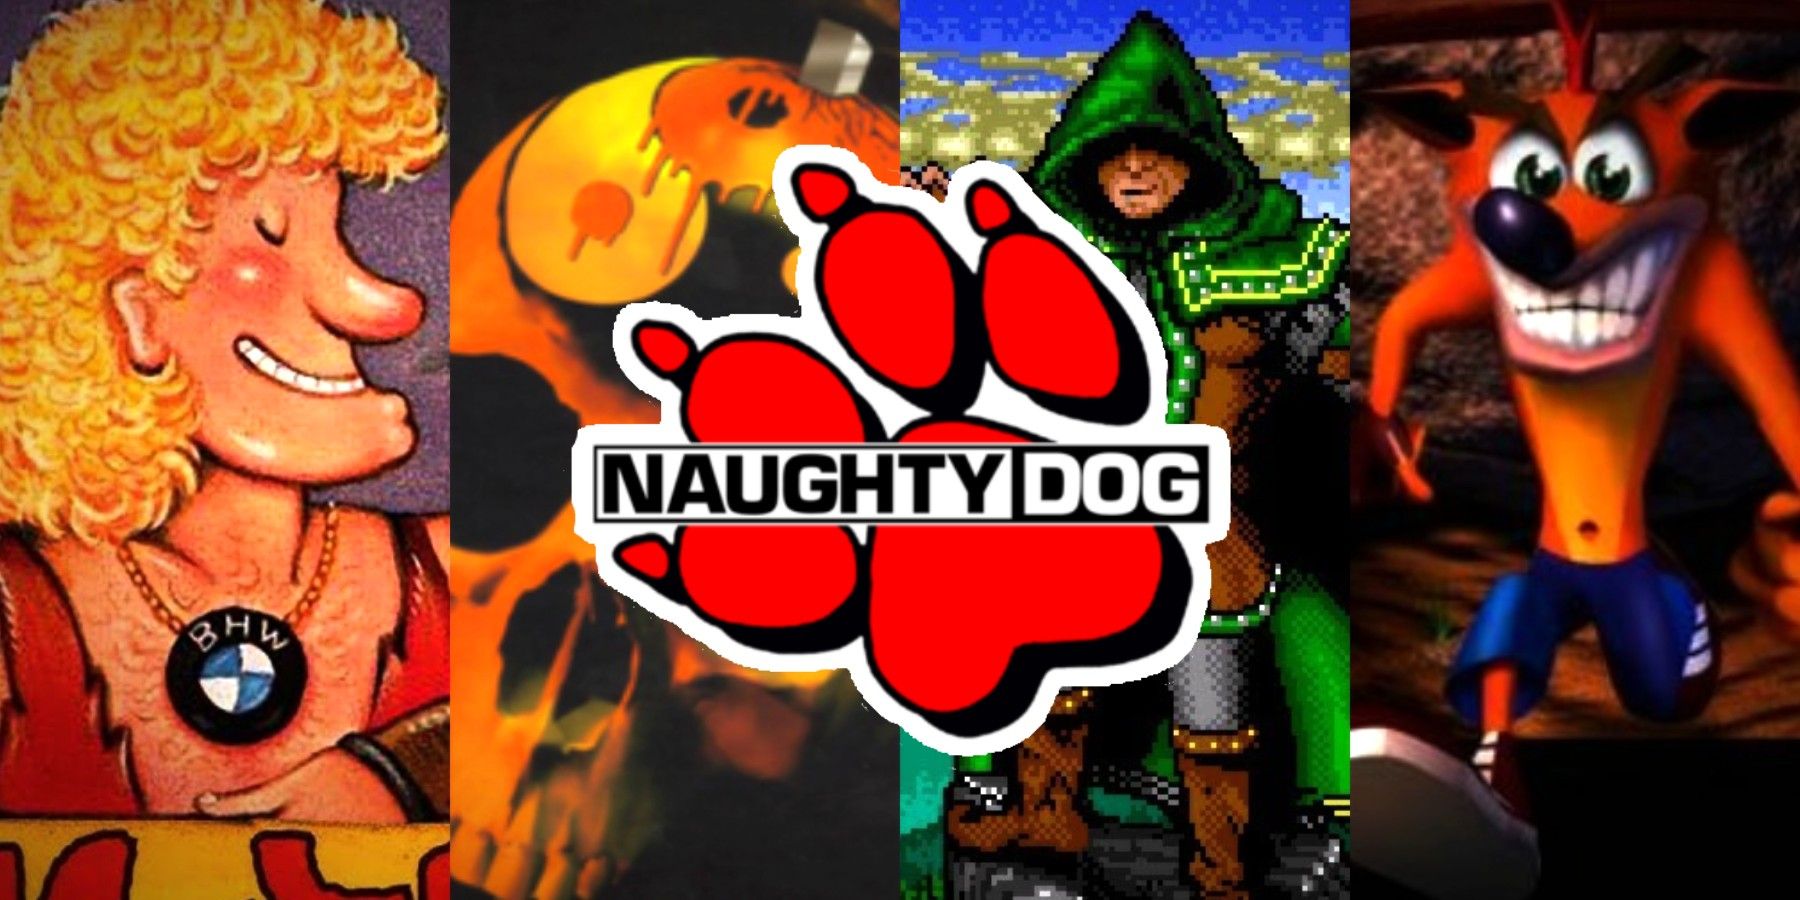 Naughty Dog in the 80s and 90s